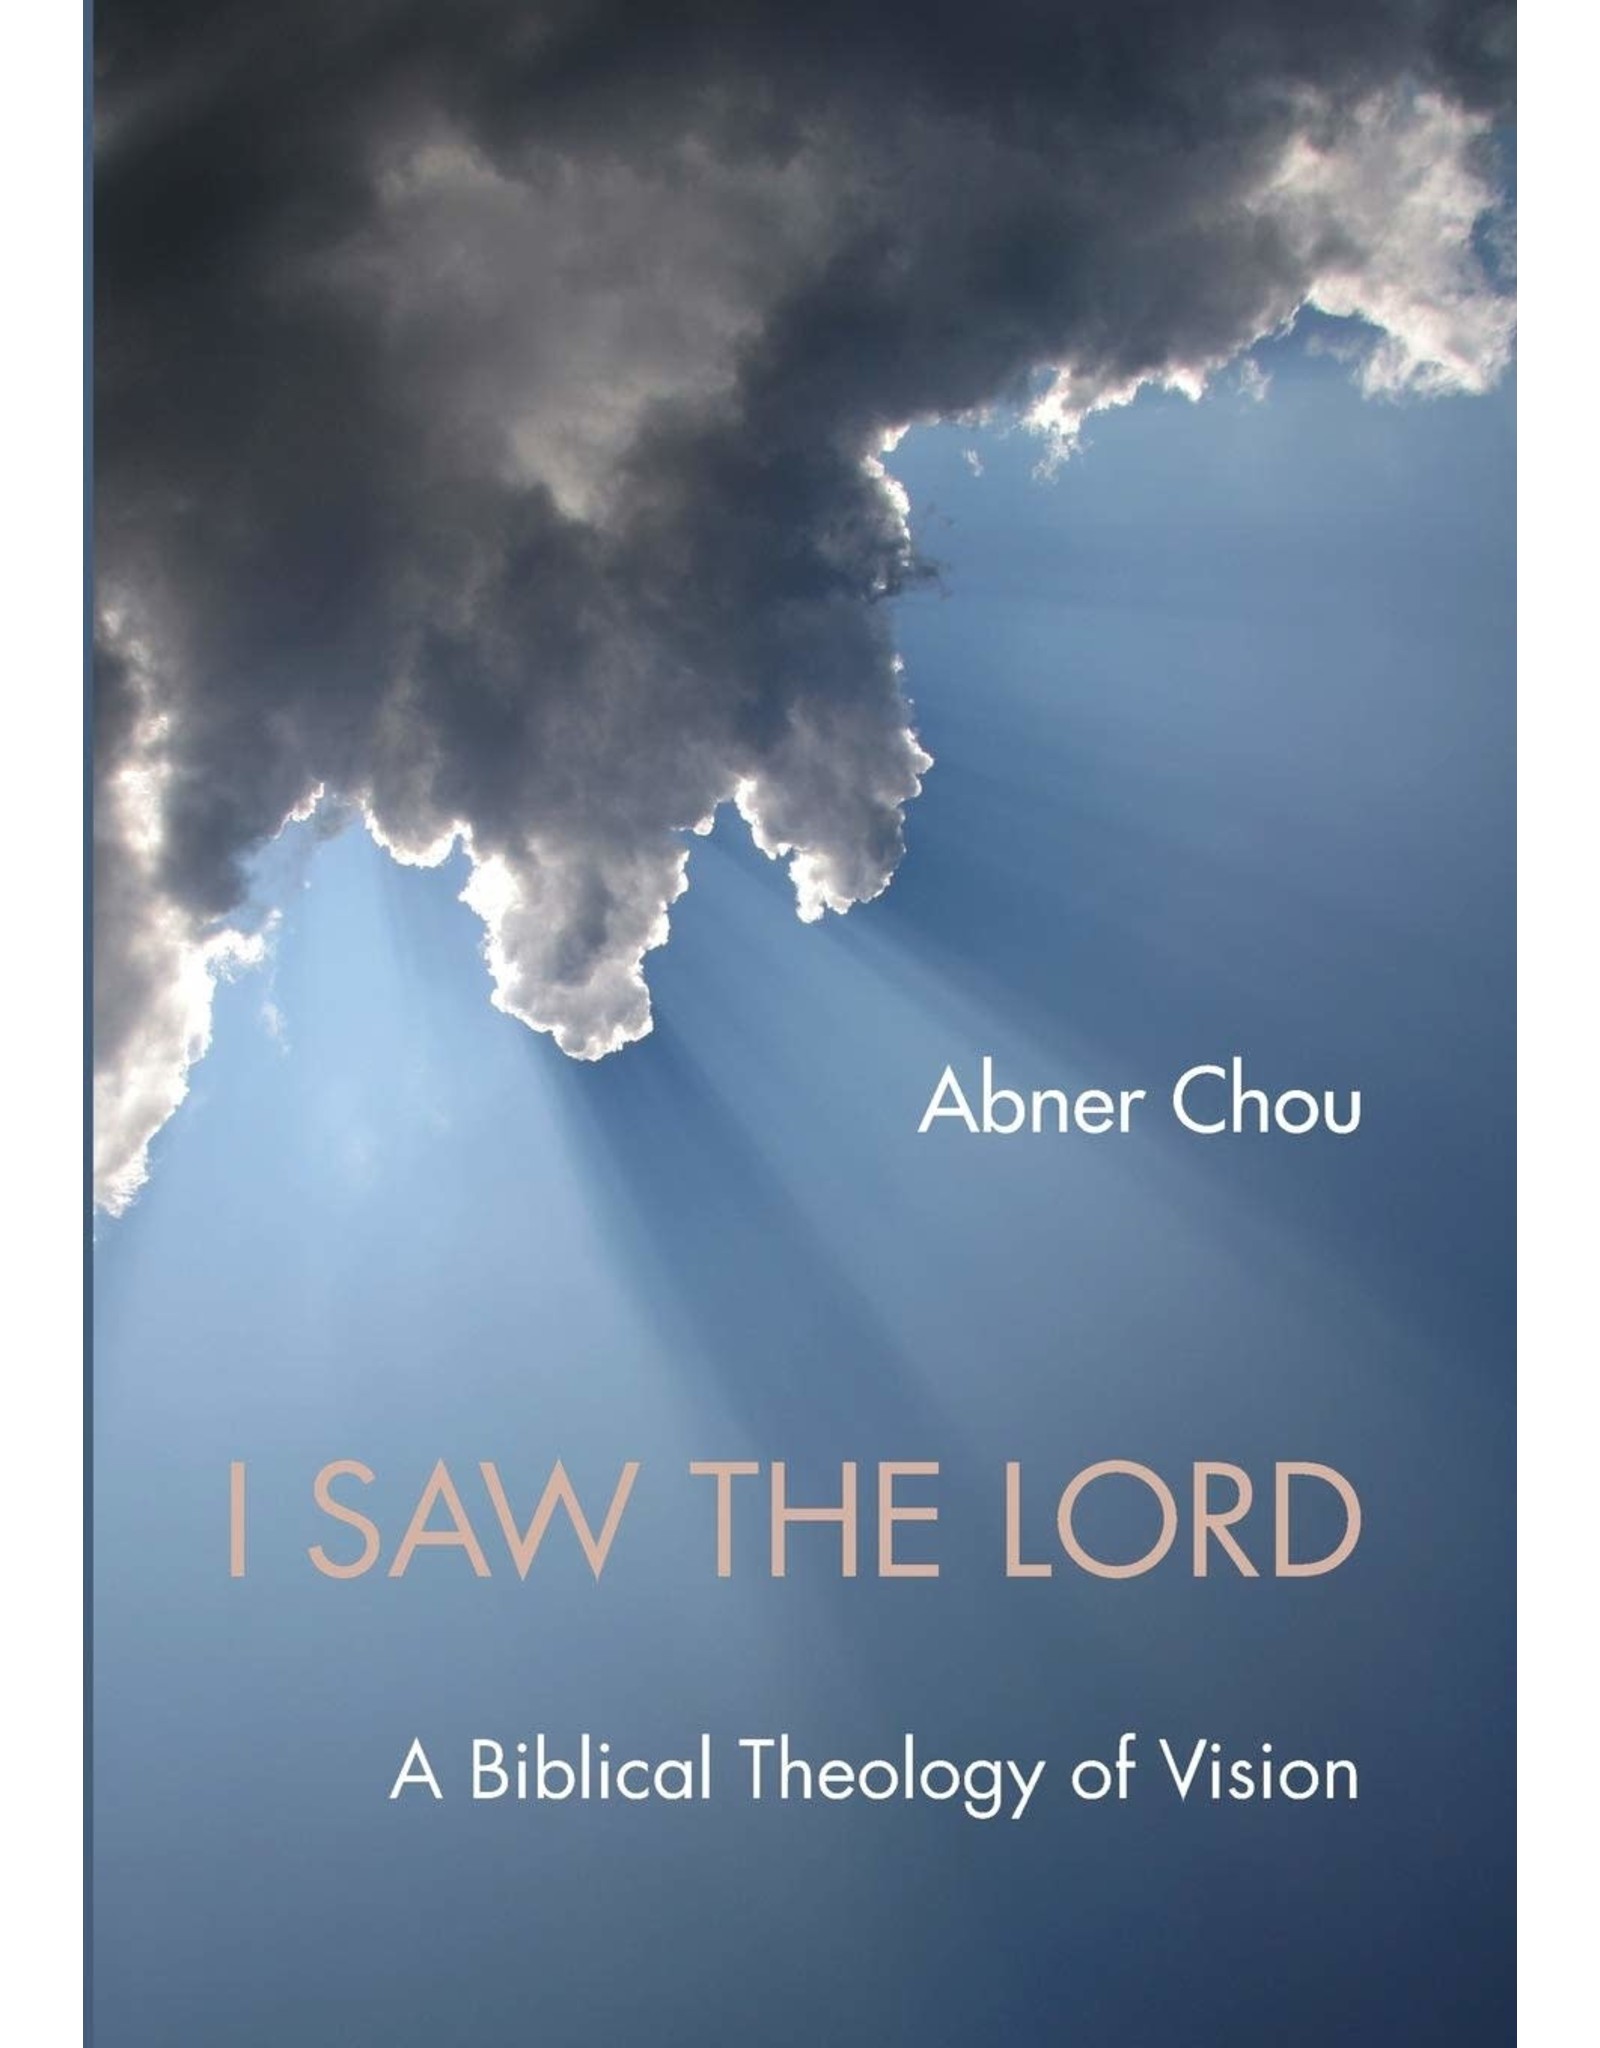 Wipf & Stock I Saw the Lord:  A Biblical Theology of Vision